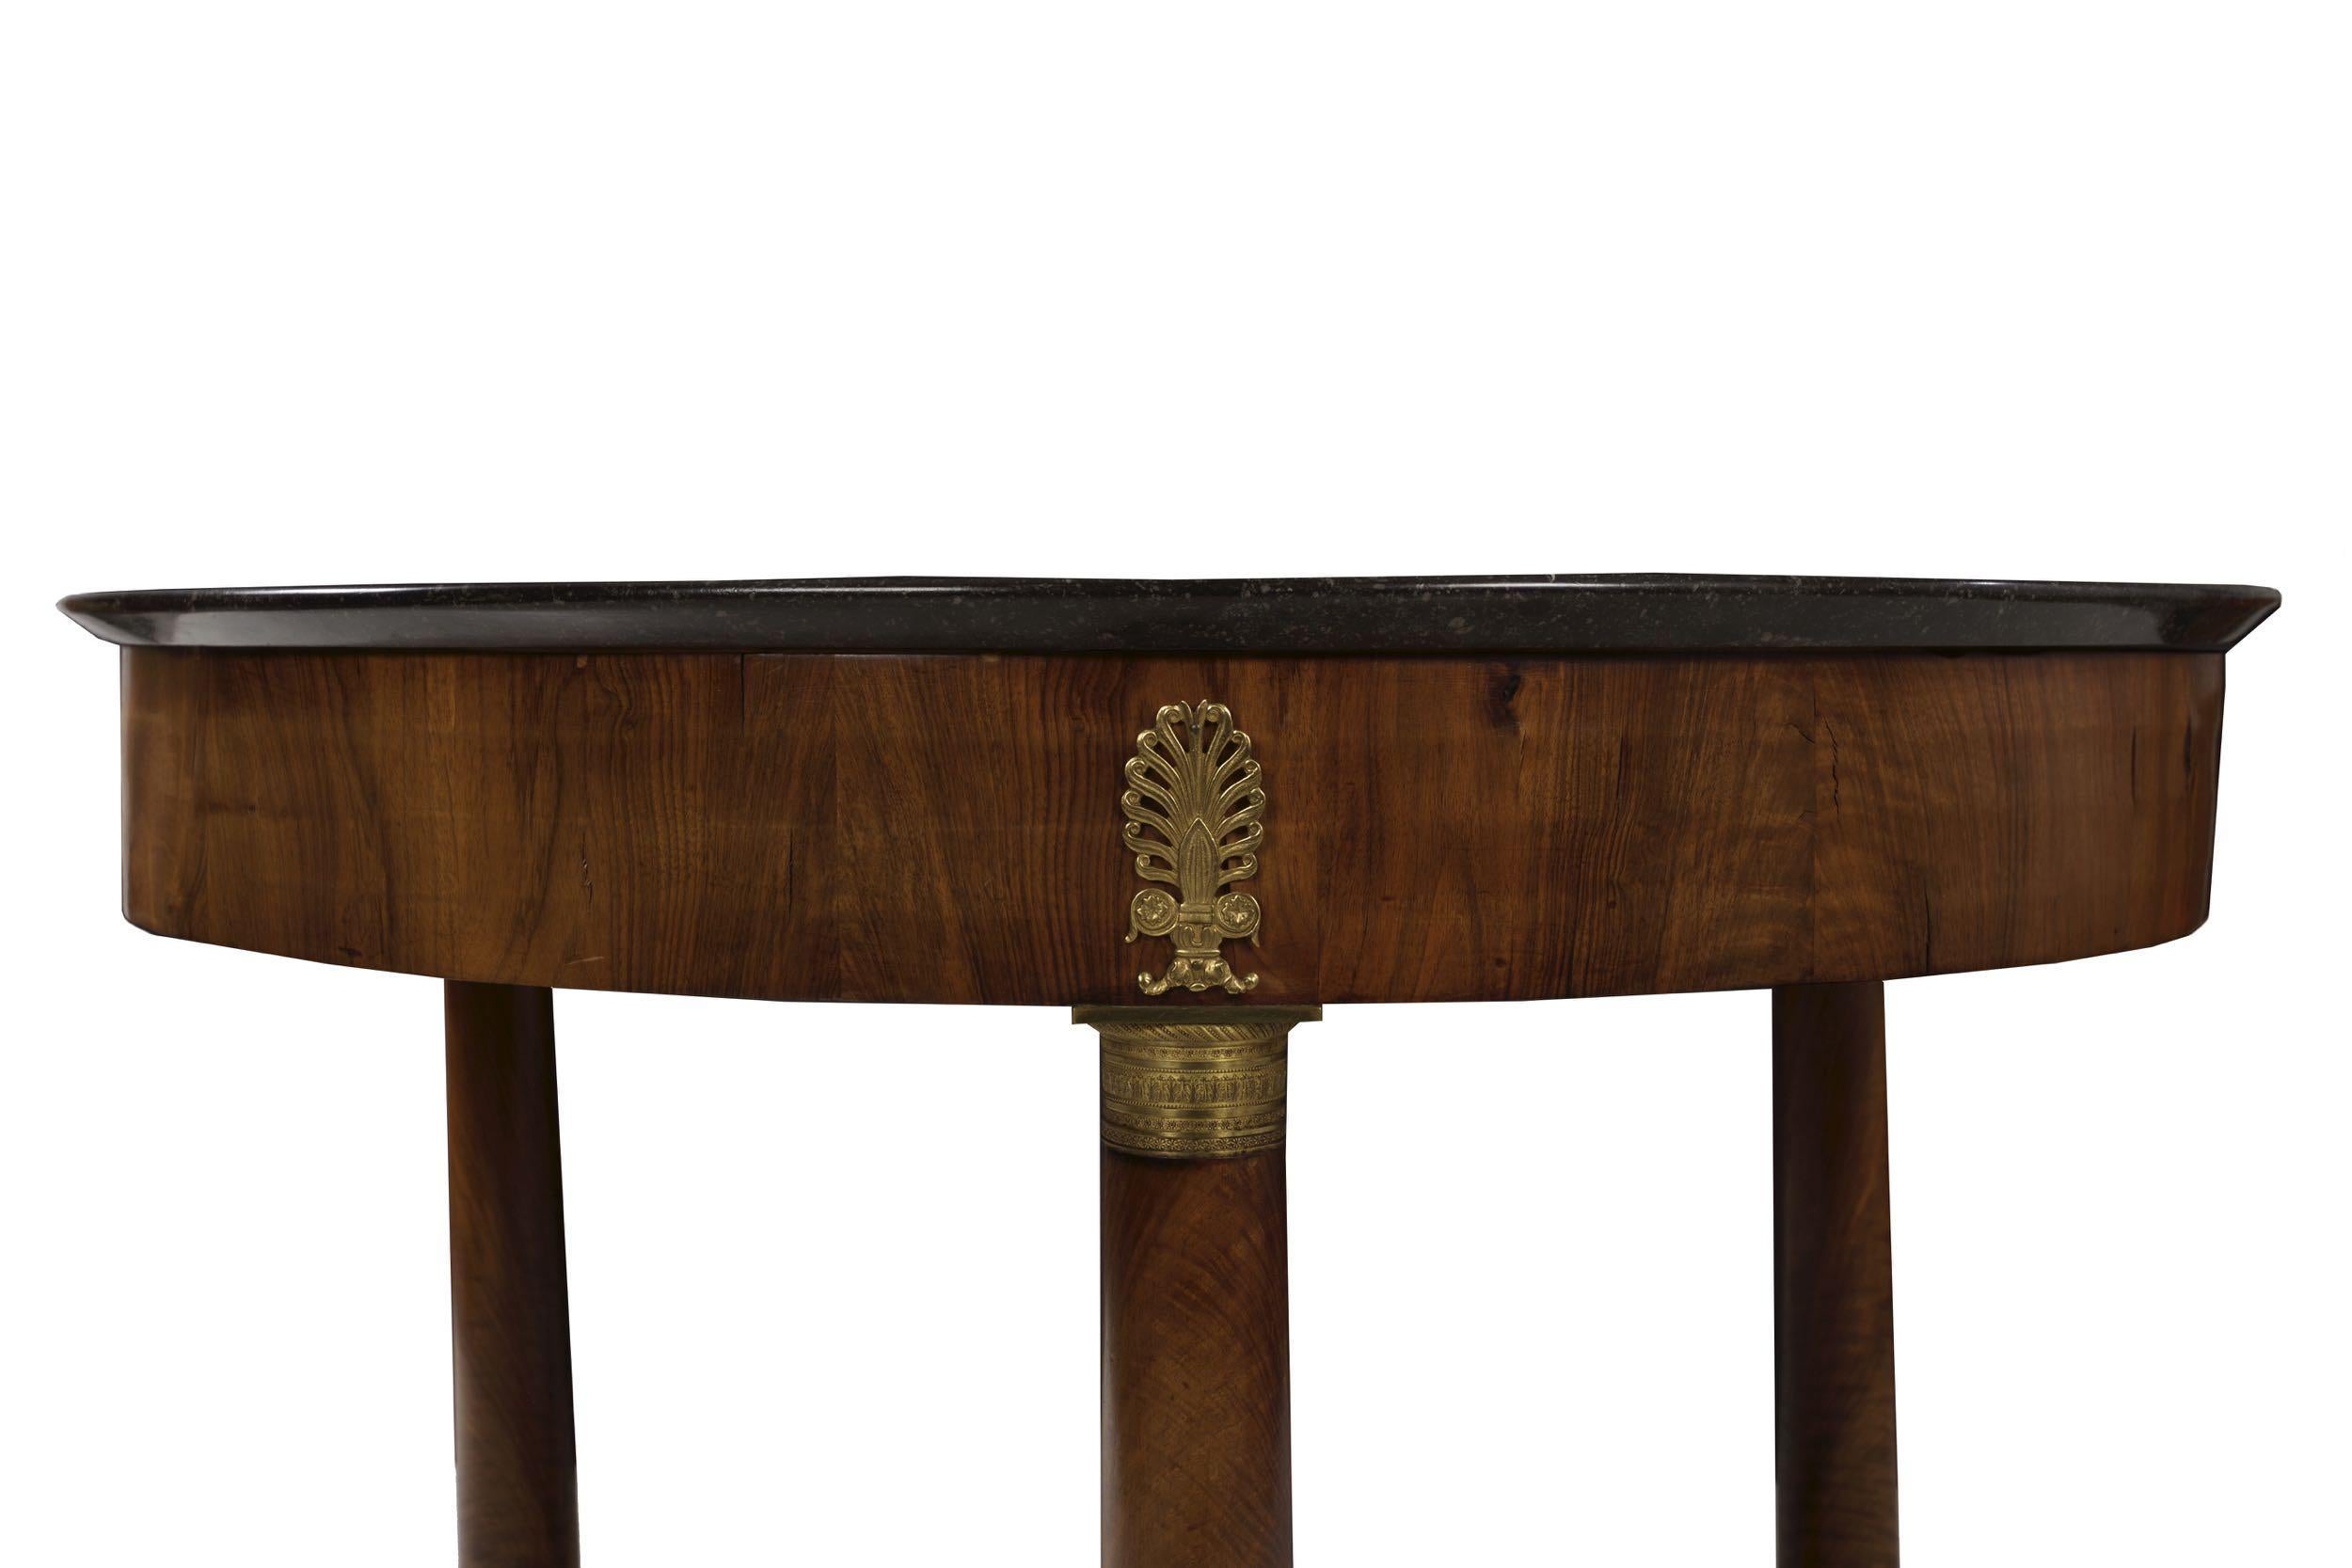 French Empire Antique Burl Walnut Center Table with Black Marble Top, circa 1815 For Sale 11